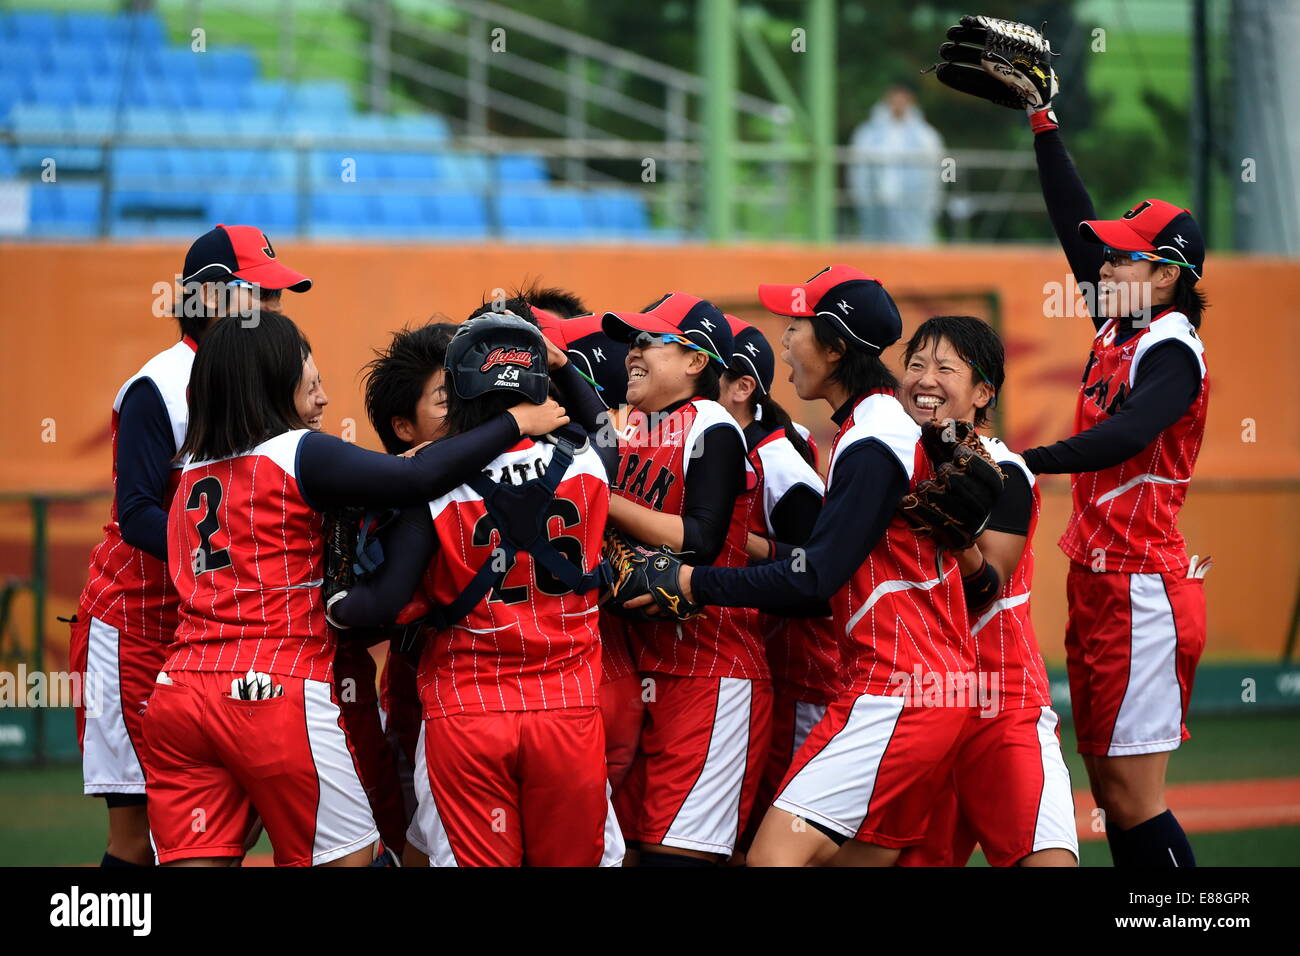 (141002) -- INCHEON, Oct. 2, 2014 (Xinhua) -- Players of Japan celebrate after the women's softball grand final match against Chinese Taipei at the 17th Asian Games in Incheon, South Korea, Oct. 2, 2014. Japan defeated Chinese Taipei 6-0 and claimed the title. (Xinhua/Gao Jianjun)(mcg) Stock Photo